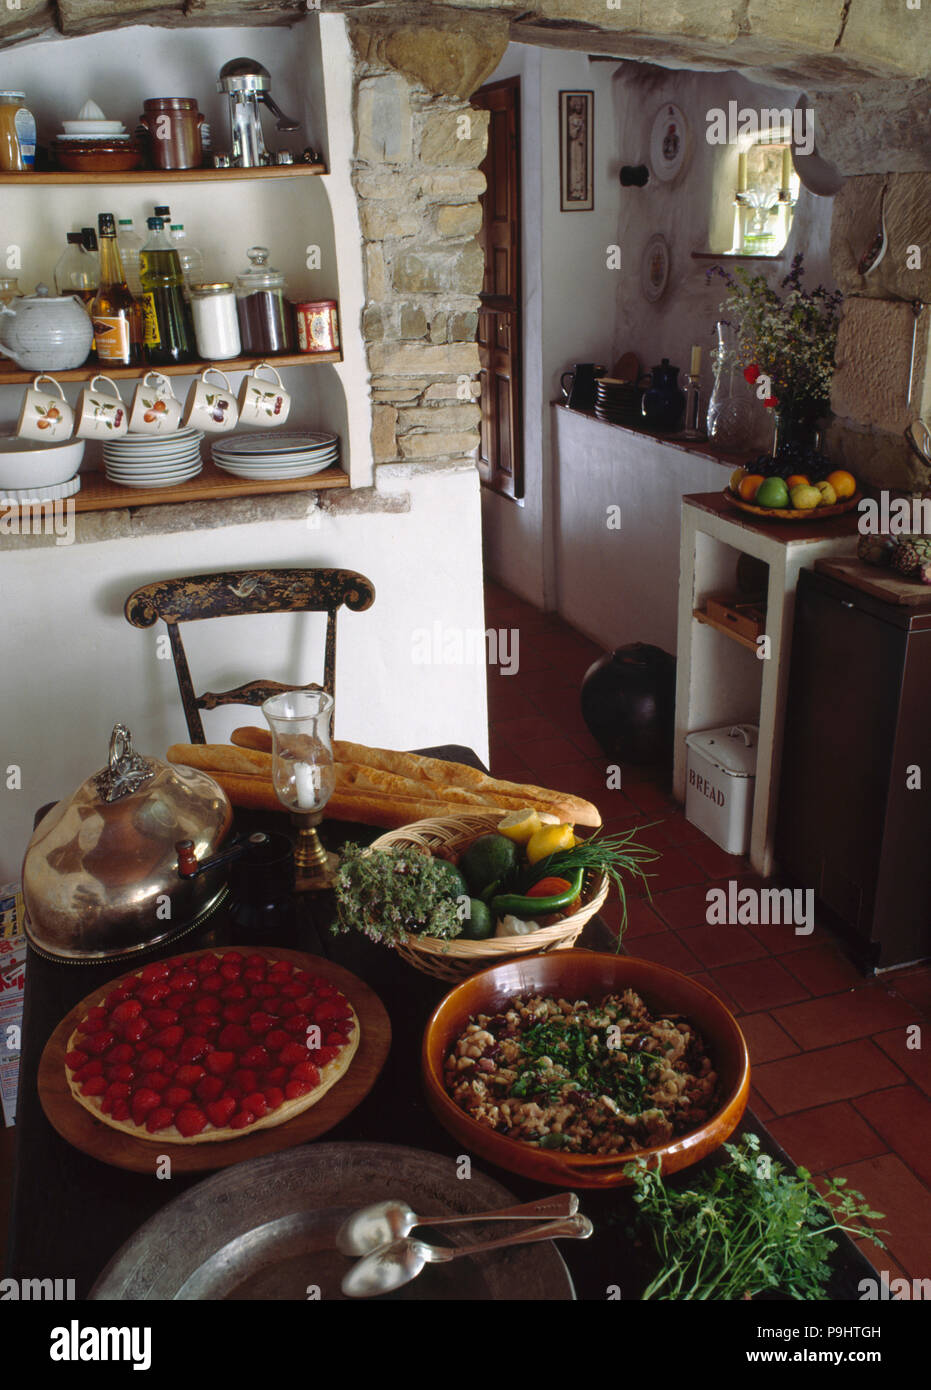 Food on the table in small cottage kitchen Stock Photo